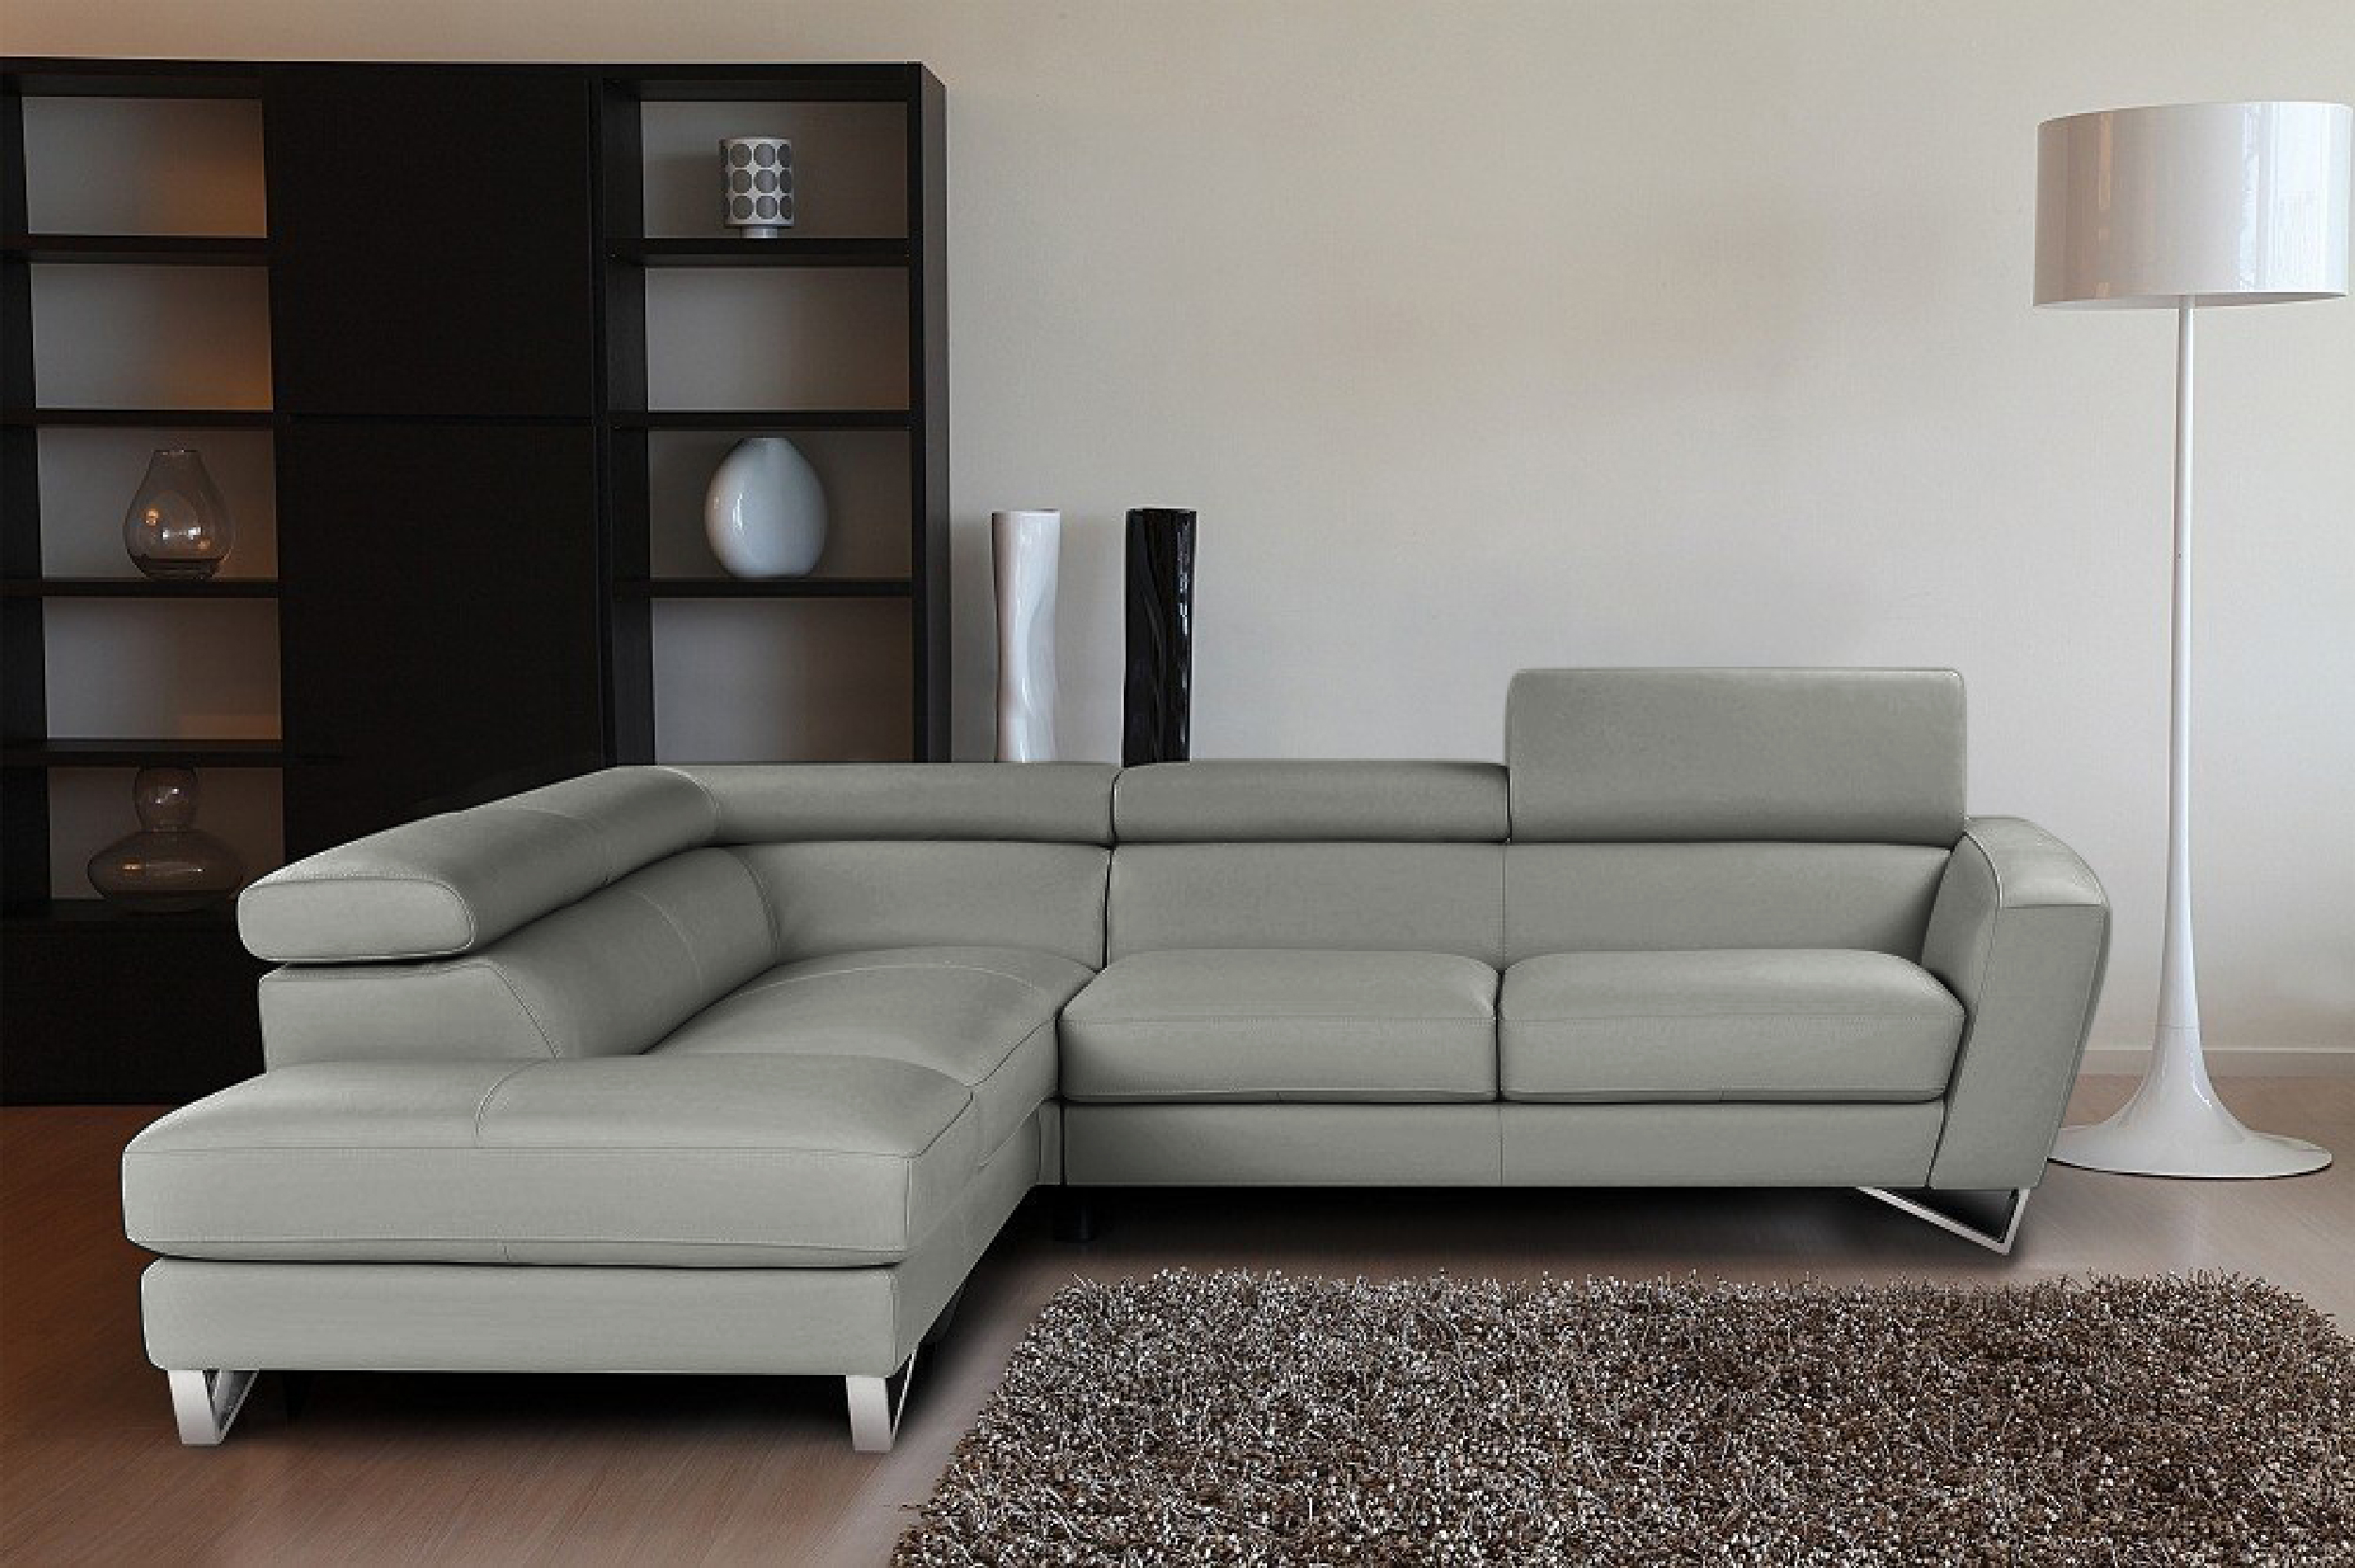 Details about   Sparta Grain Italian Leather Sectional Sofa in Grey 